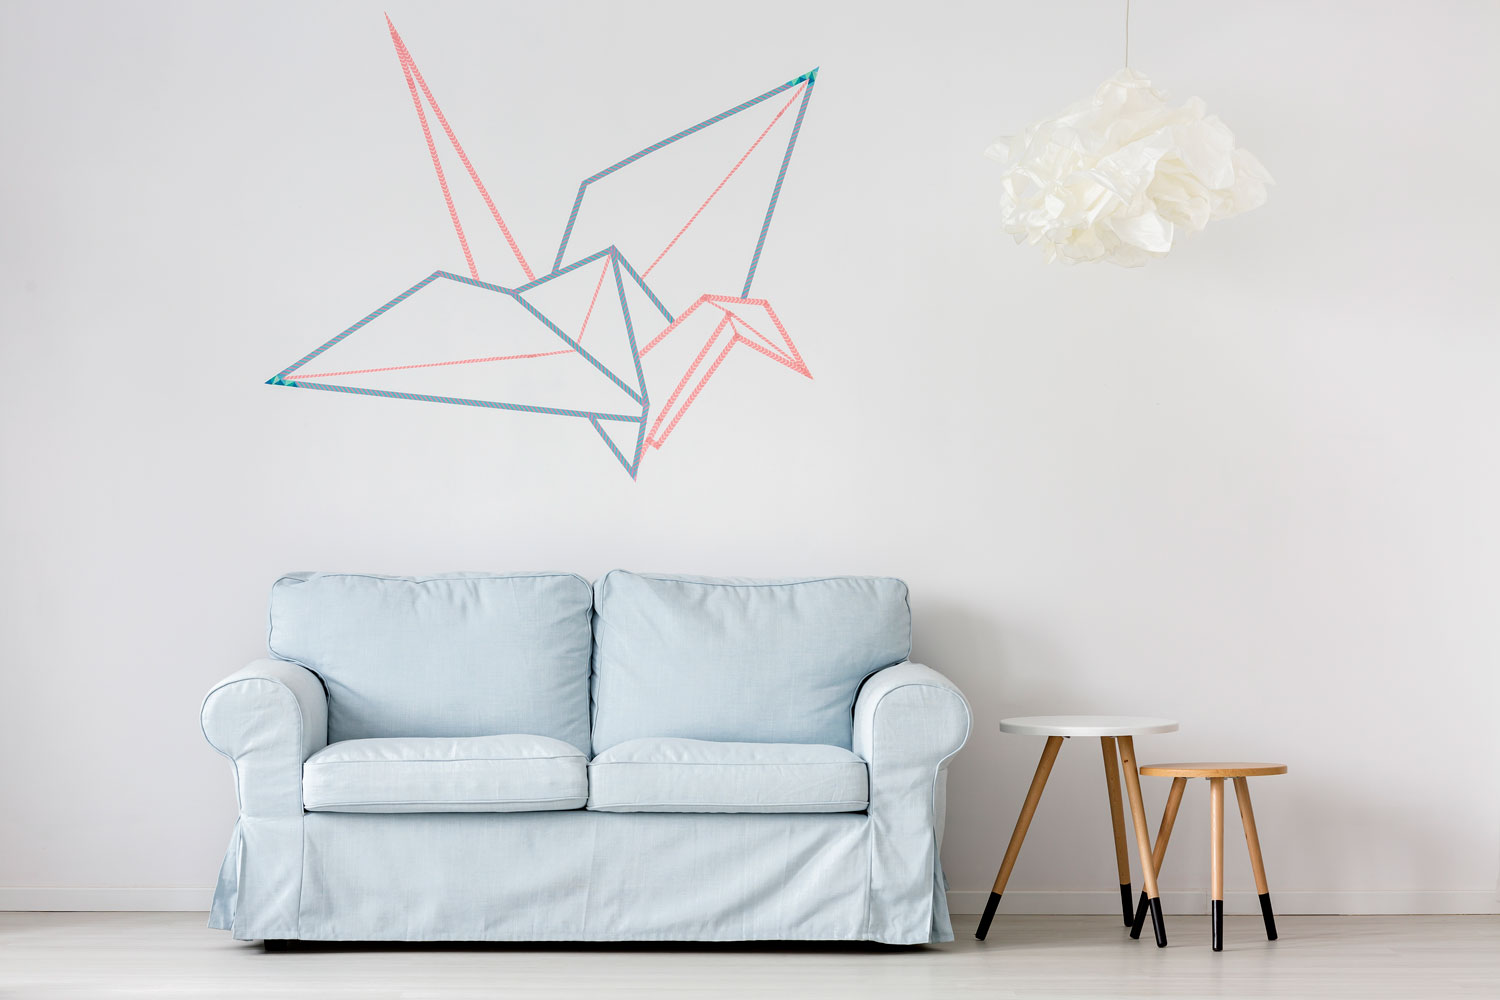 A two seater light blue colored sofa with an origami wall decor